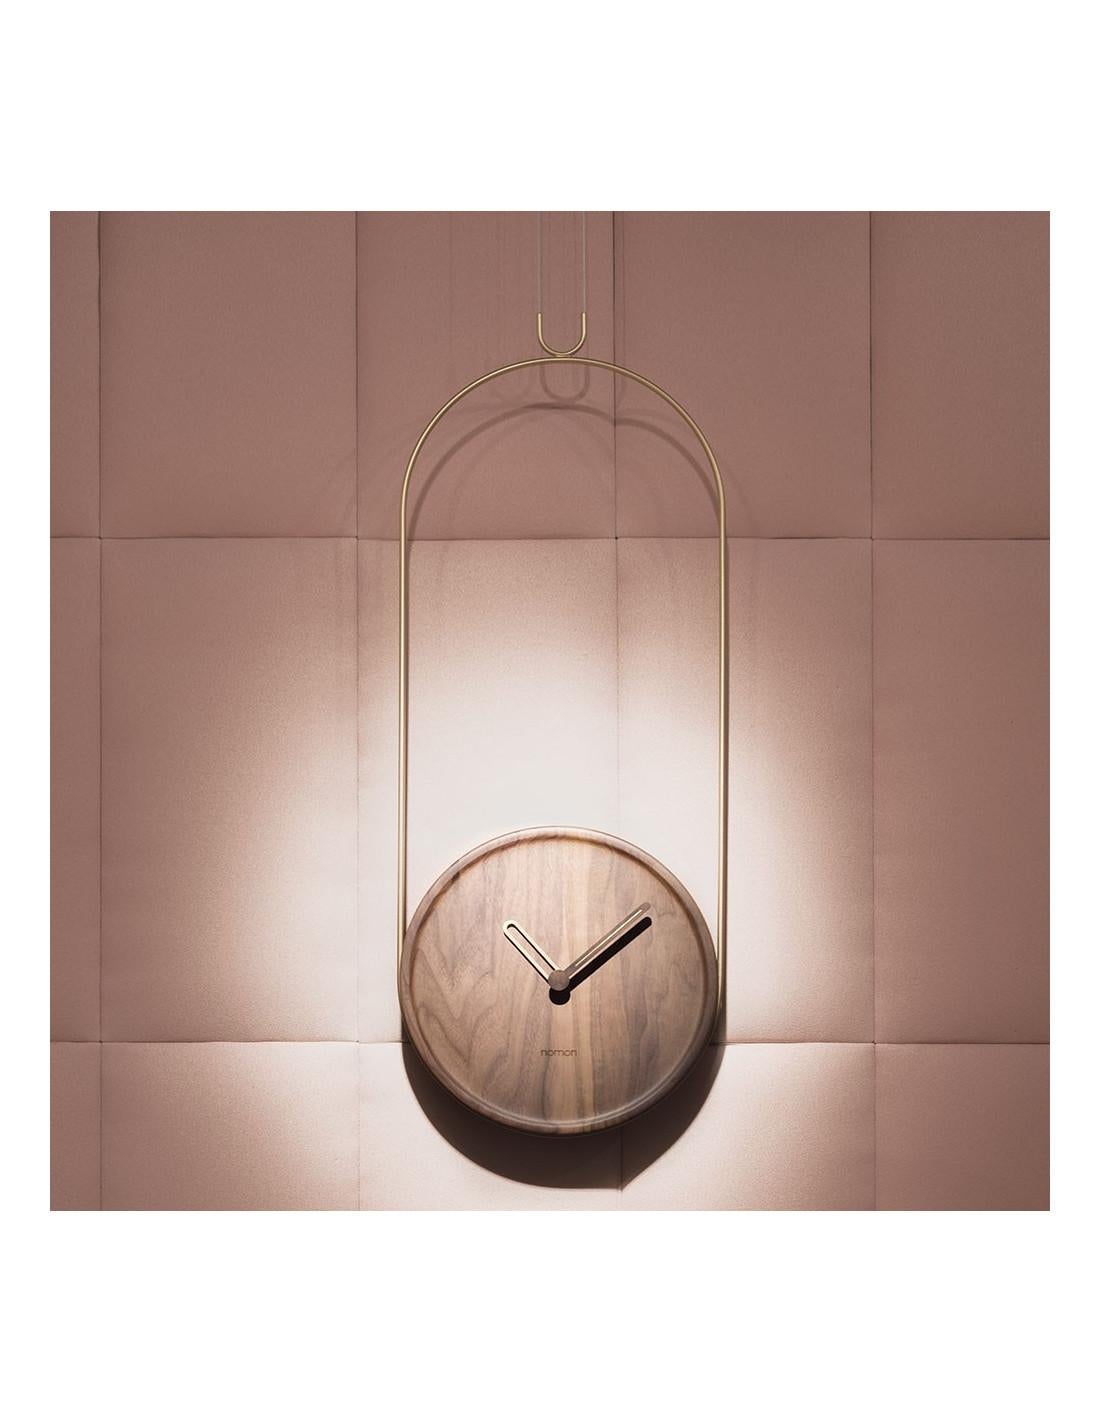 The Colgante Walnut is a sophisticated wall clock that is suspended from a curved metal rod finished in polished or black brass.
Colgante Walnut Wall Clock : The Case is made of Walnut wood , Needles made of Walnut wood with polished brass or black